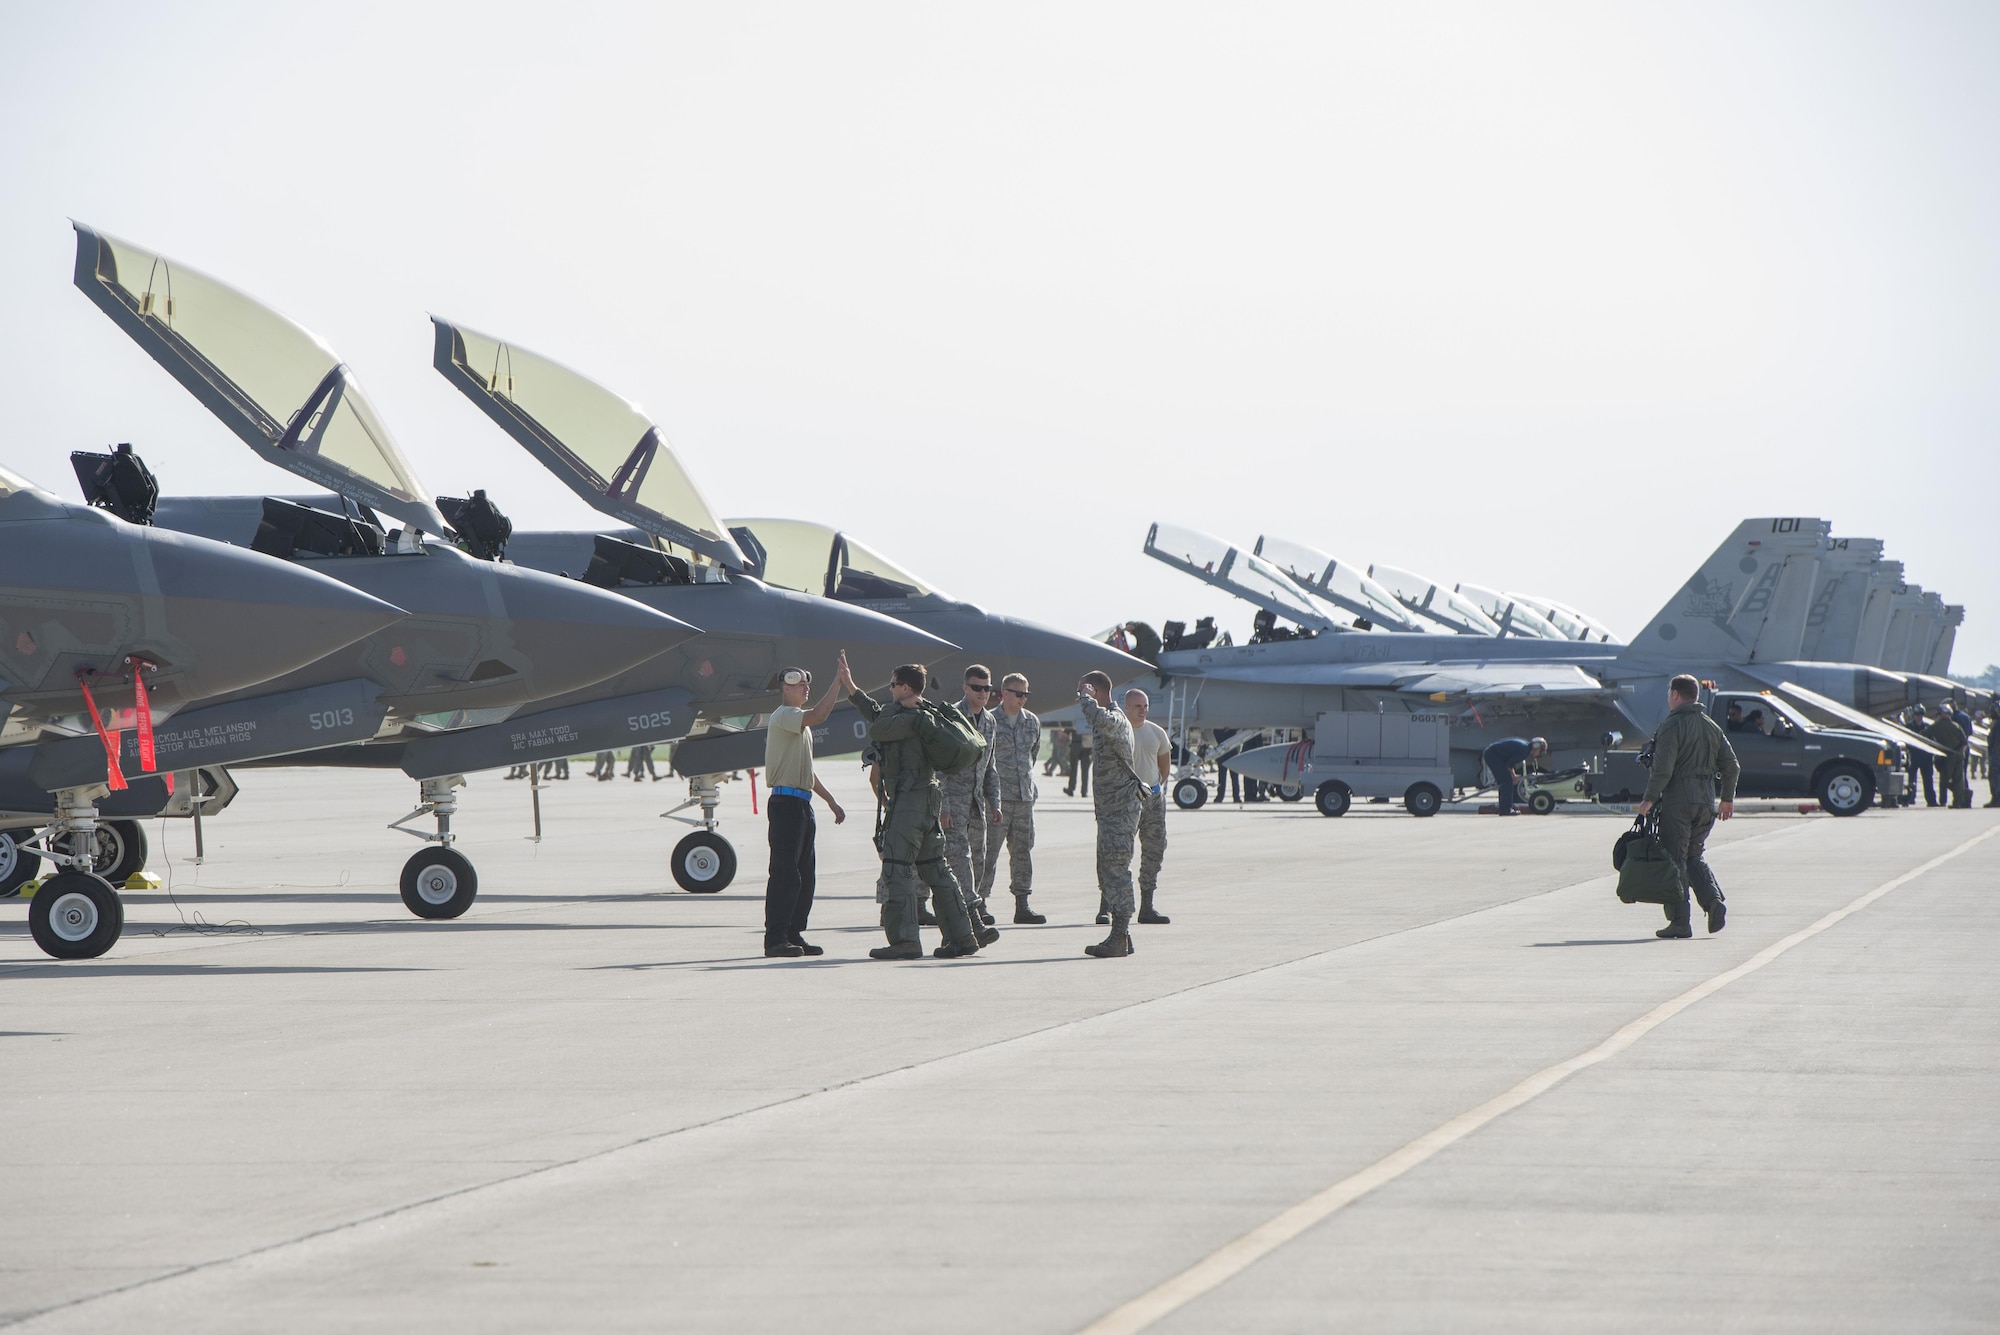 33rd Aircraft Maintenance Squadron crew chiefs greet 33rd Fighter Wing pilots as they step to their jets during exercise Northern Lightning Aug. 26, 2016, at Volk Field, Wis. Northern Lightning is a joint total force exercise between the Air National Guard, Air Force and Navy conducting offensive counter air, suppression and destruction of enemy air defense and close air support. (U.S. Air Force photo by Senior Airman Stormy Archer)